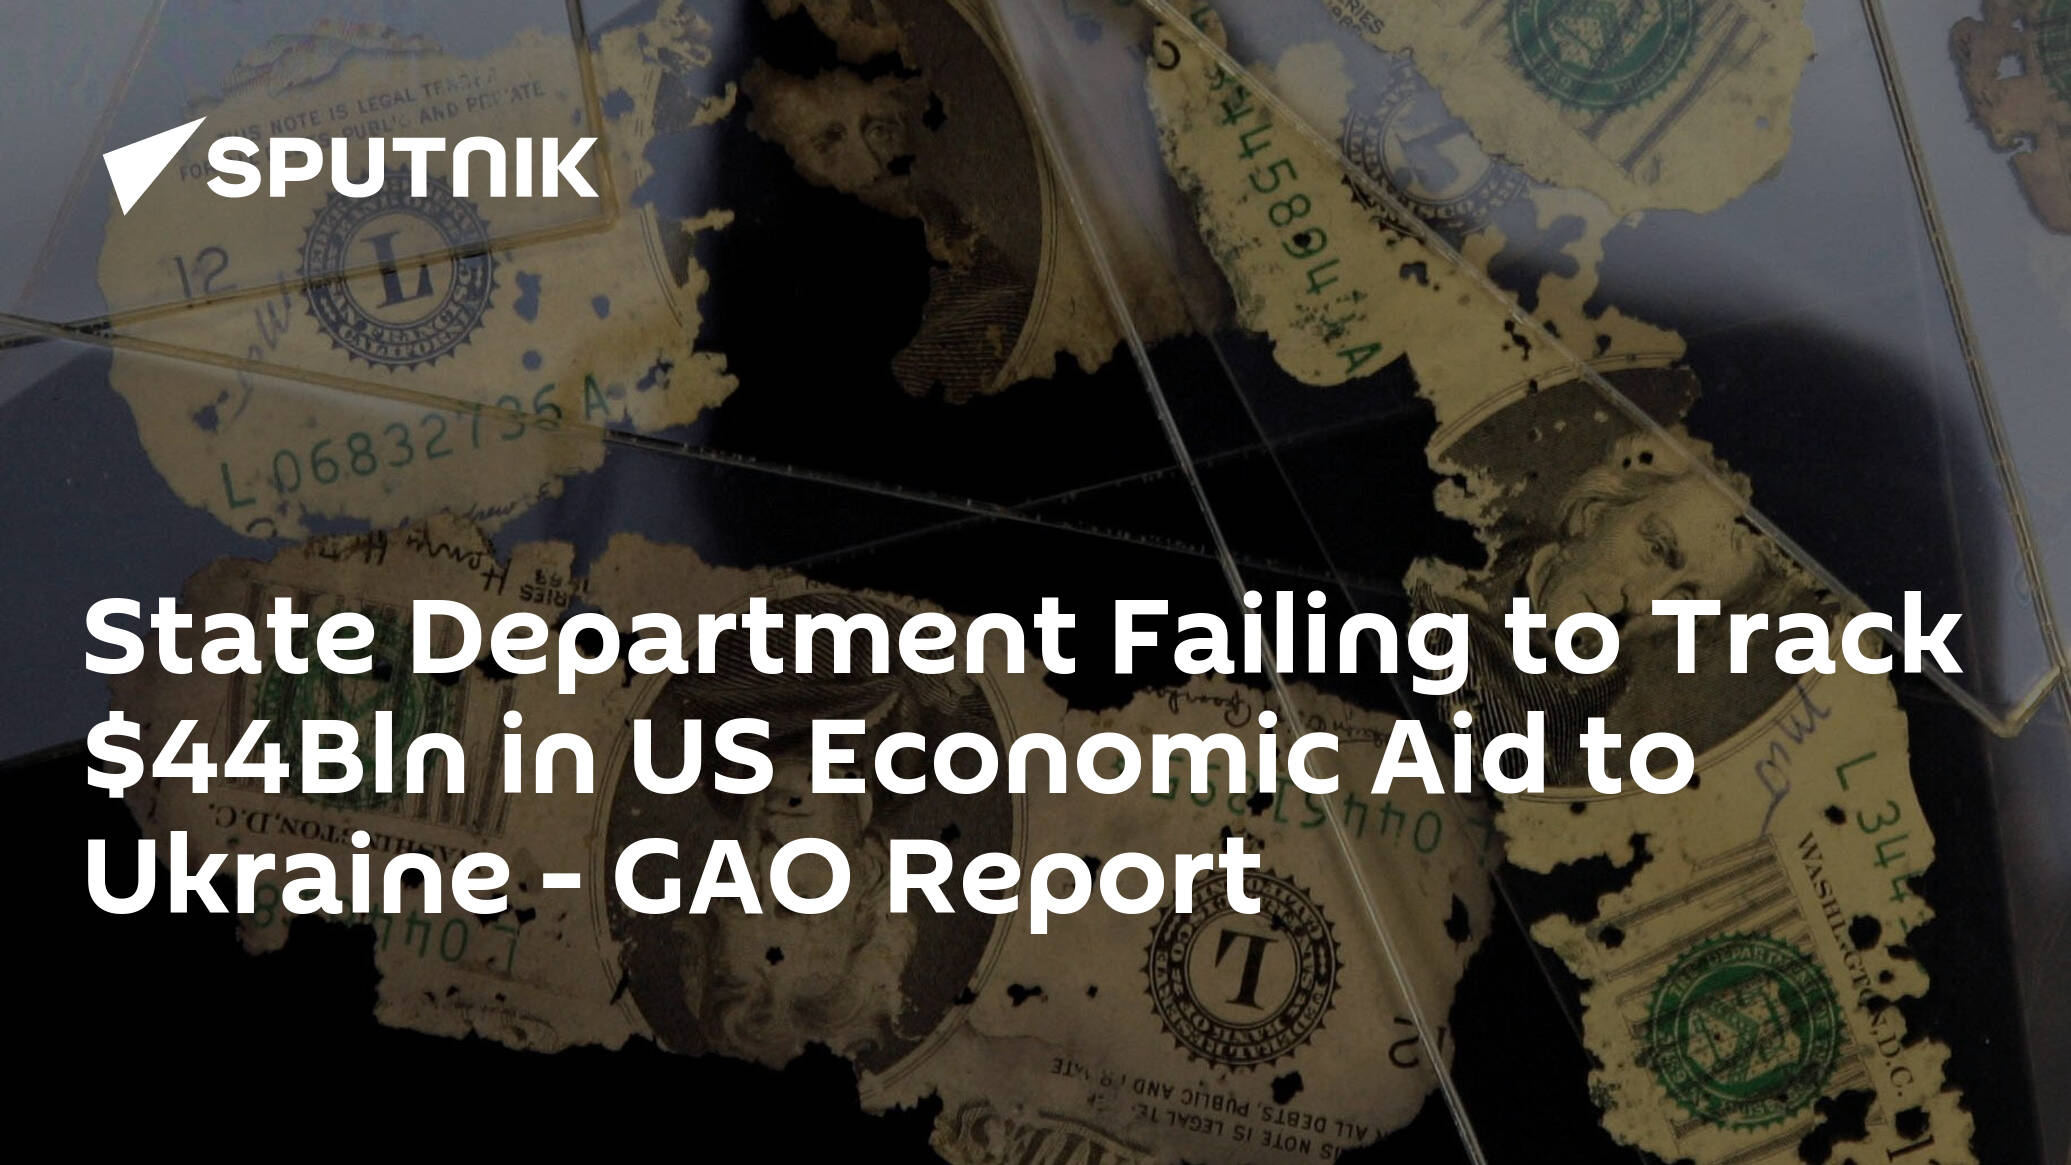 State Department Failing to Track 44Bln in US Economic Aid